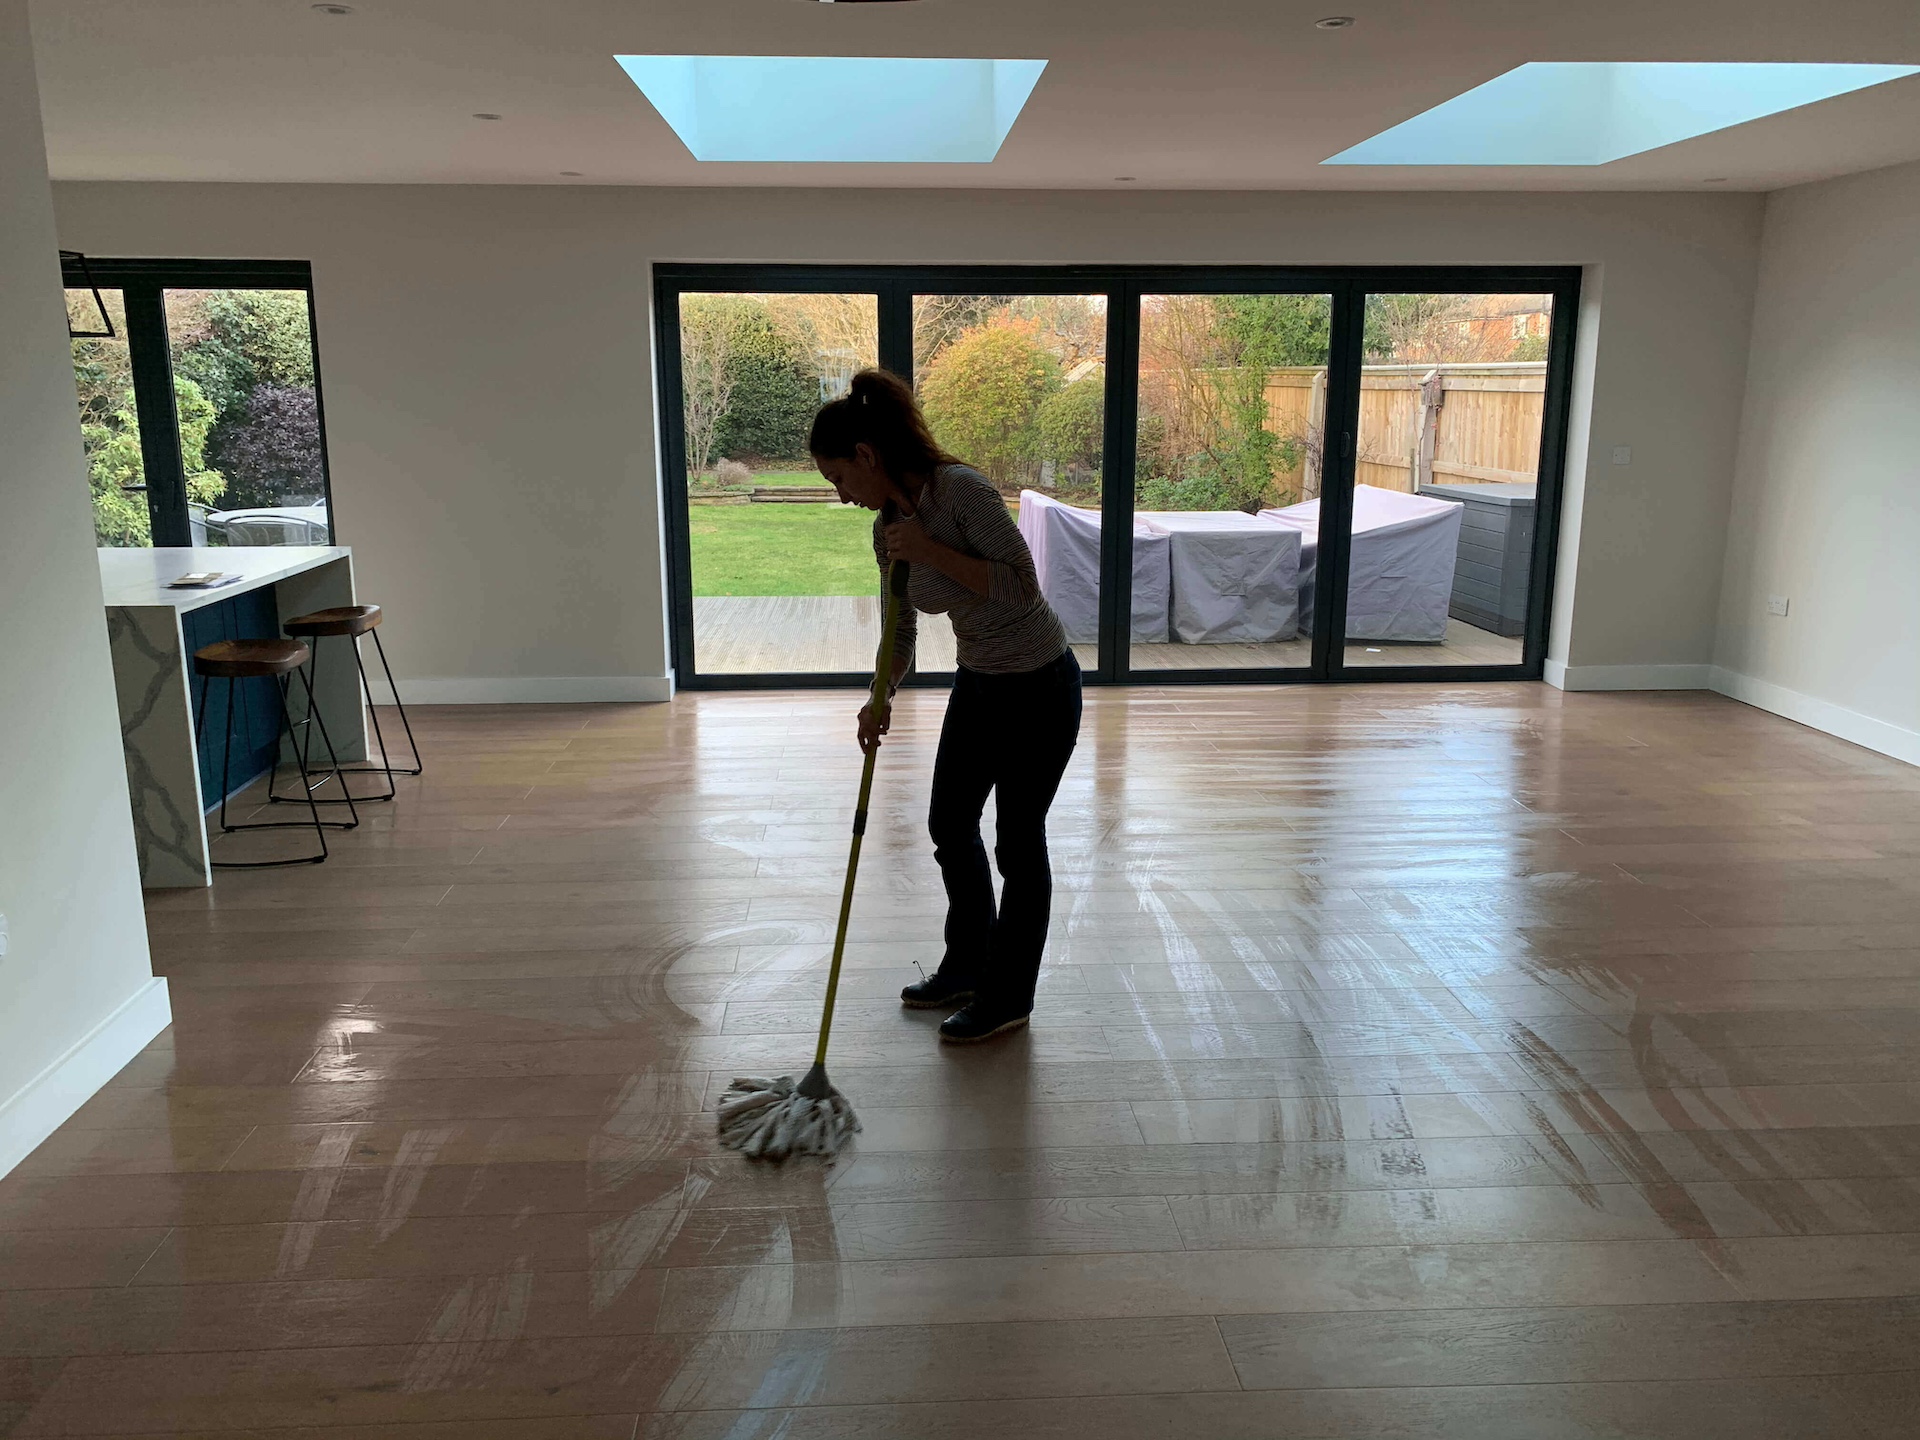 Lady cleaner from Cleaningsure mopping the floor in a living room with precision and care during a move-out cleaning service in Ealing W5, demonstrating thorough cleaning techniques for a spotless home.